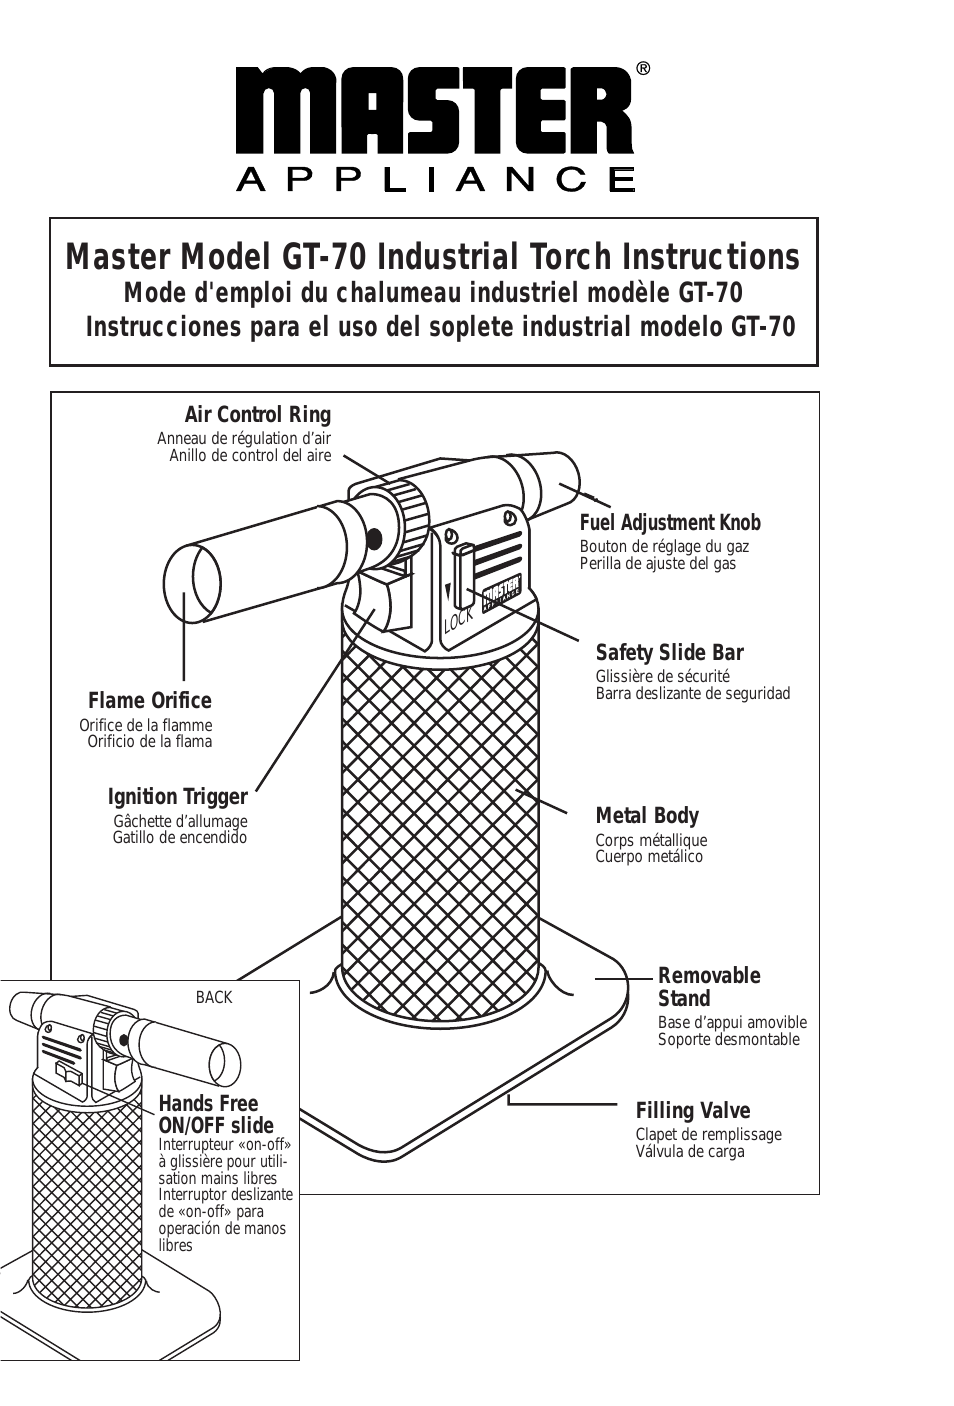 GT-70 Master General Torch